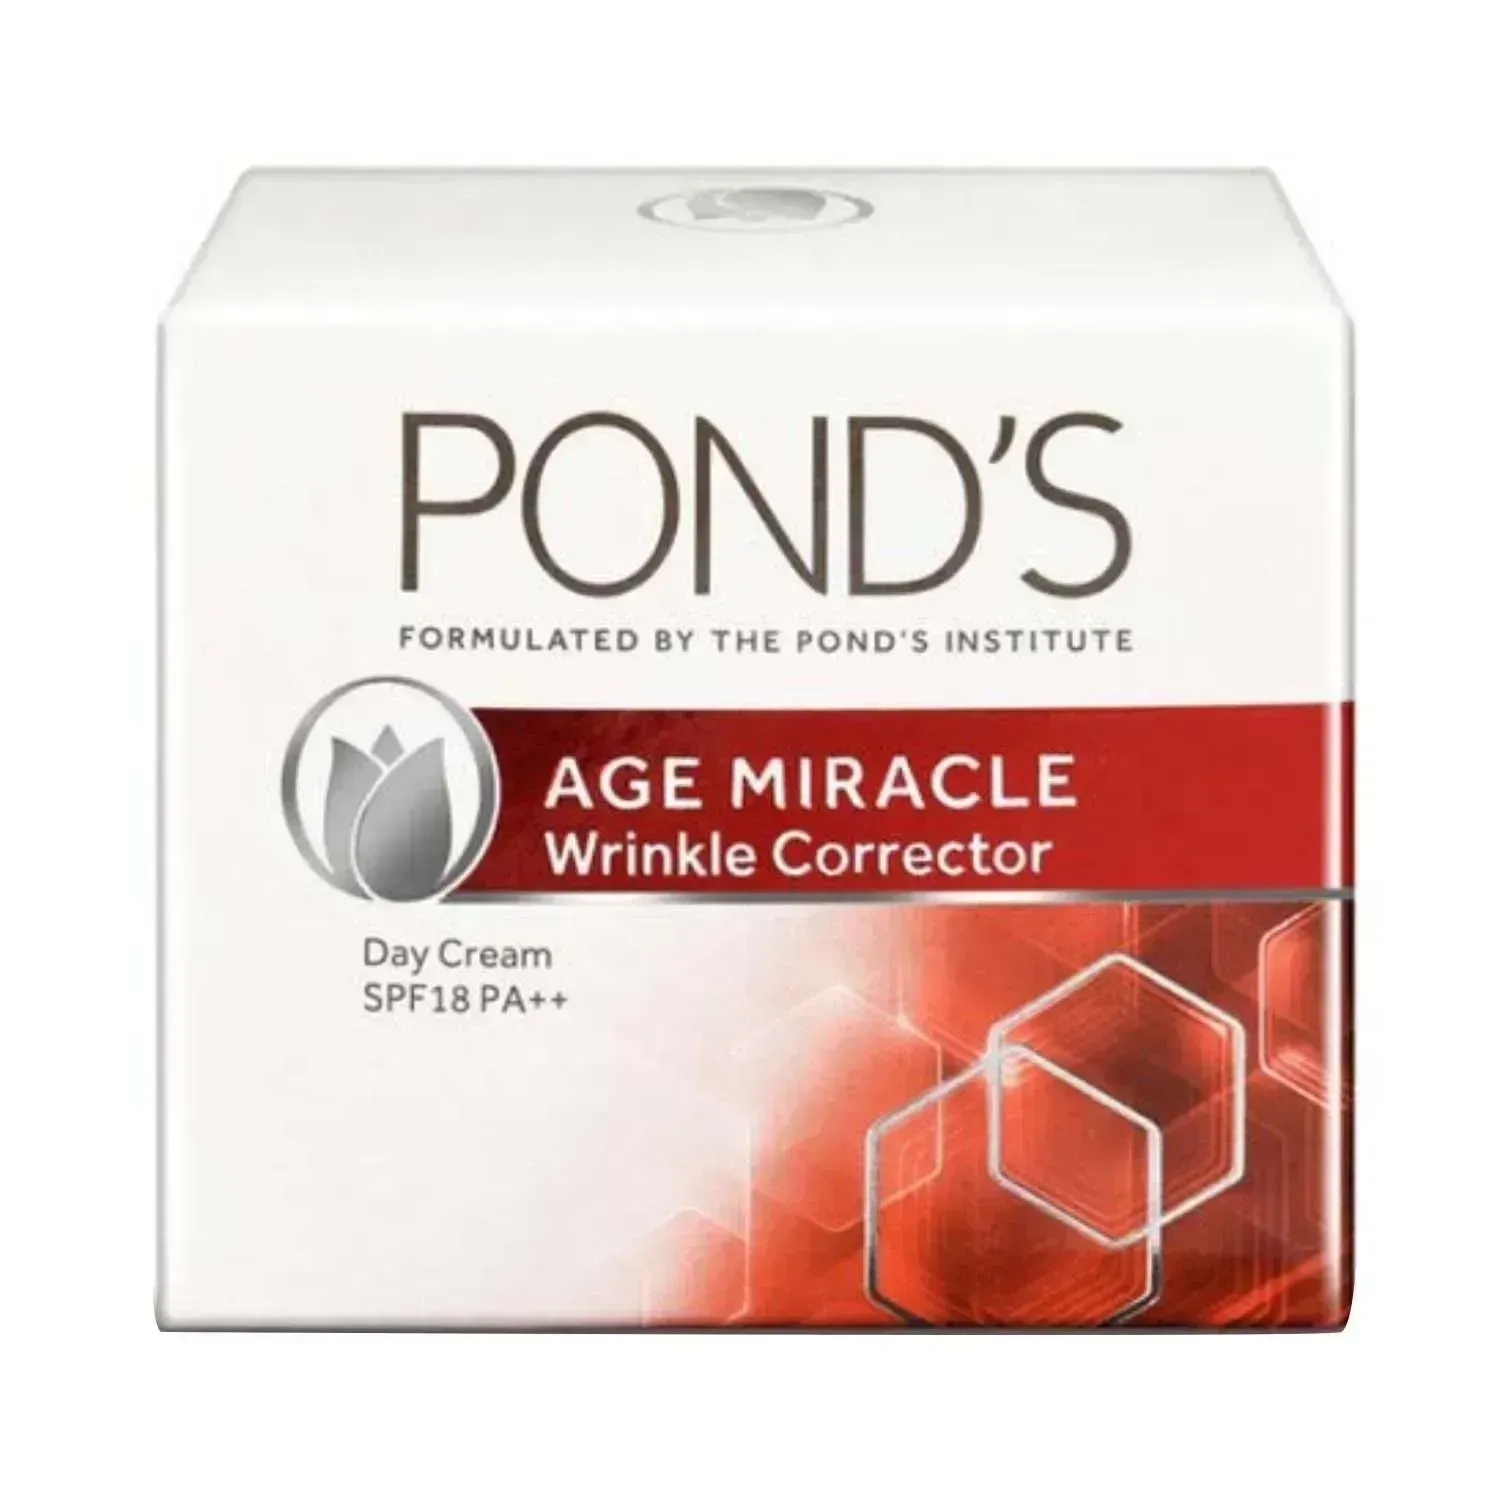 Pond's | Pond's Age Miracle Wrinkle Corrector Day Cream SPF 18 Pa++ (35g)